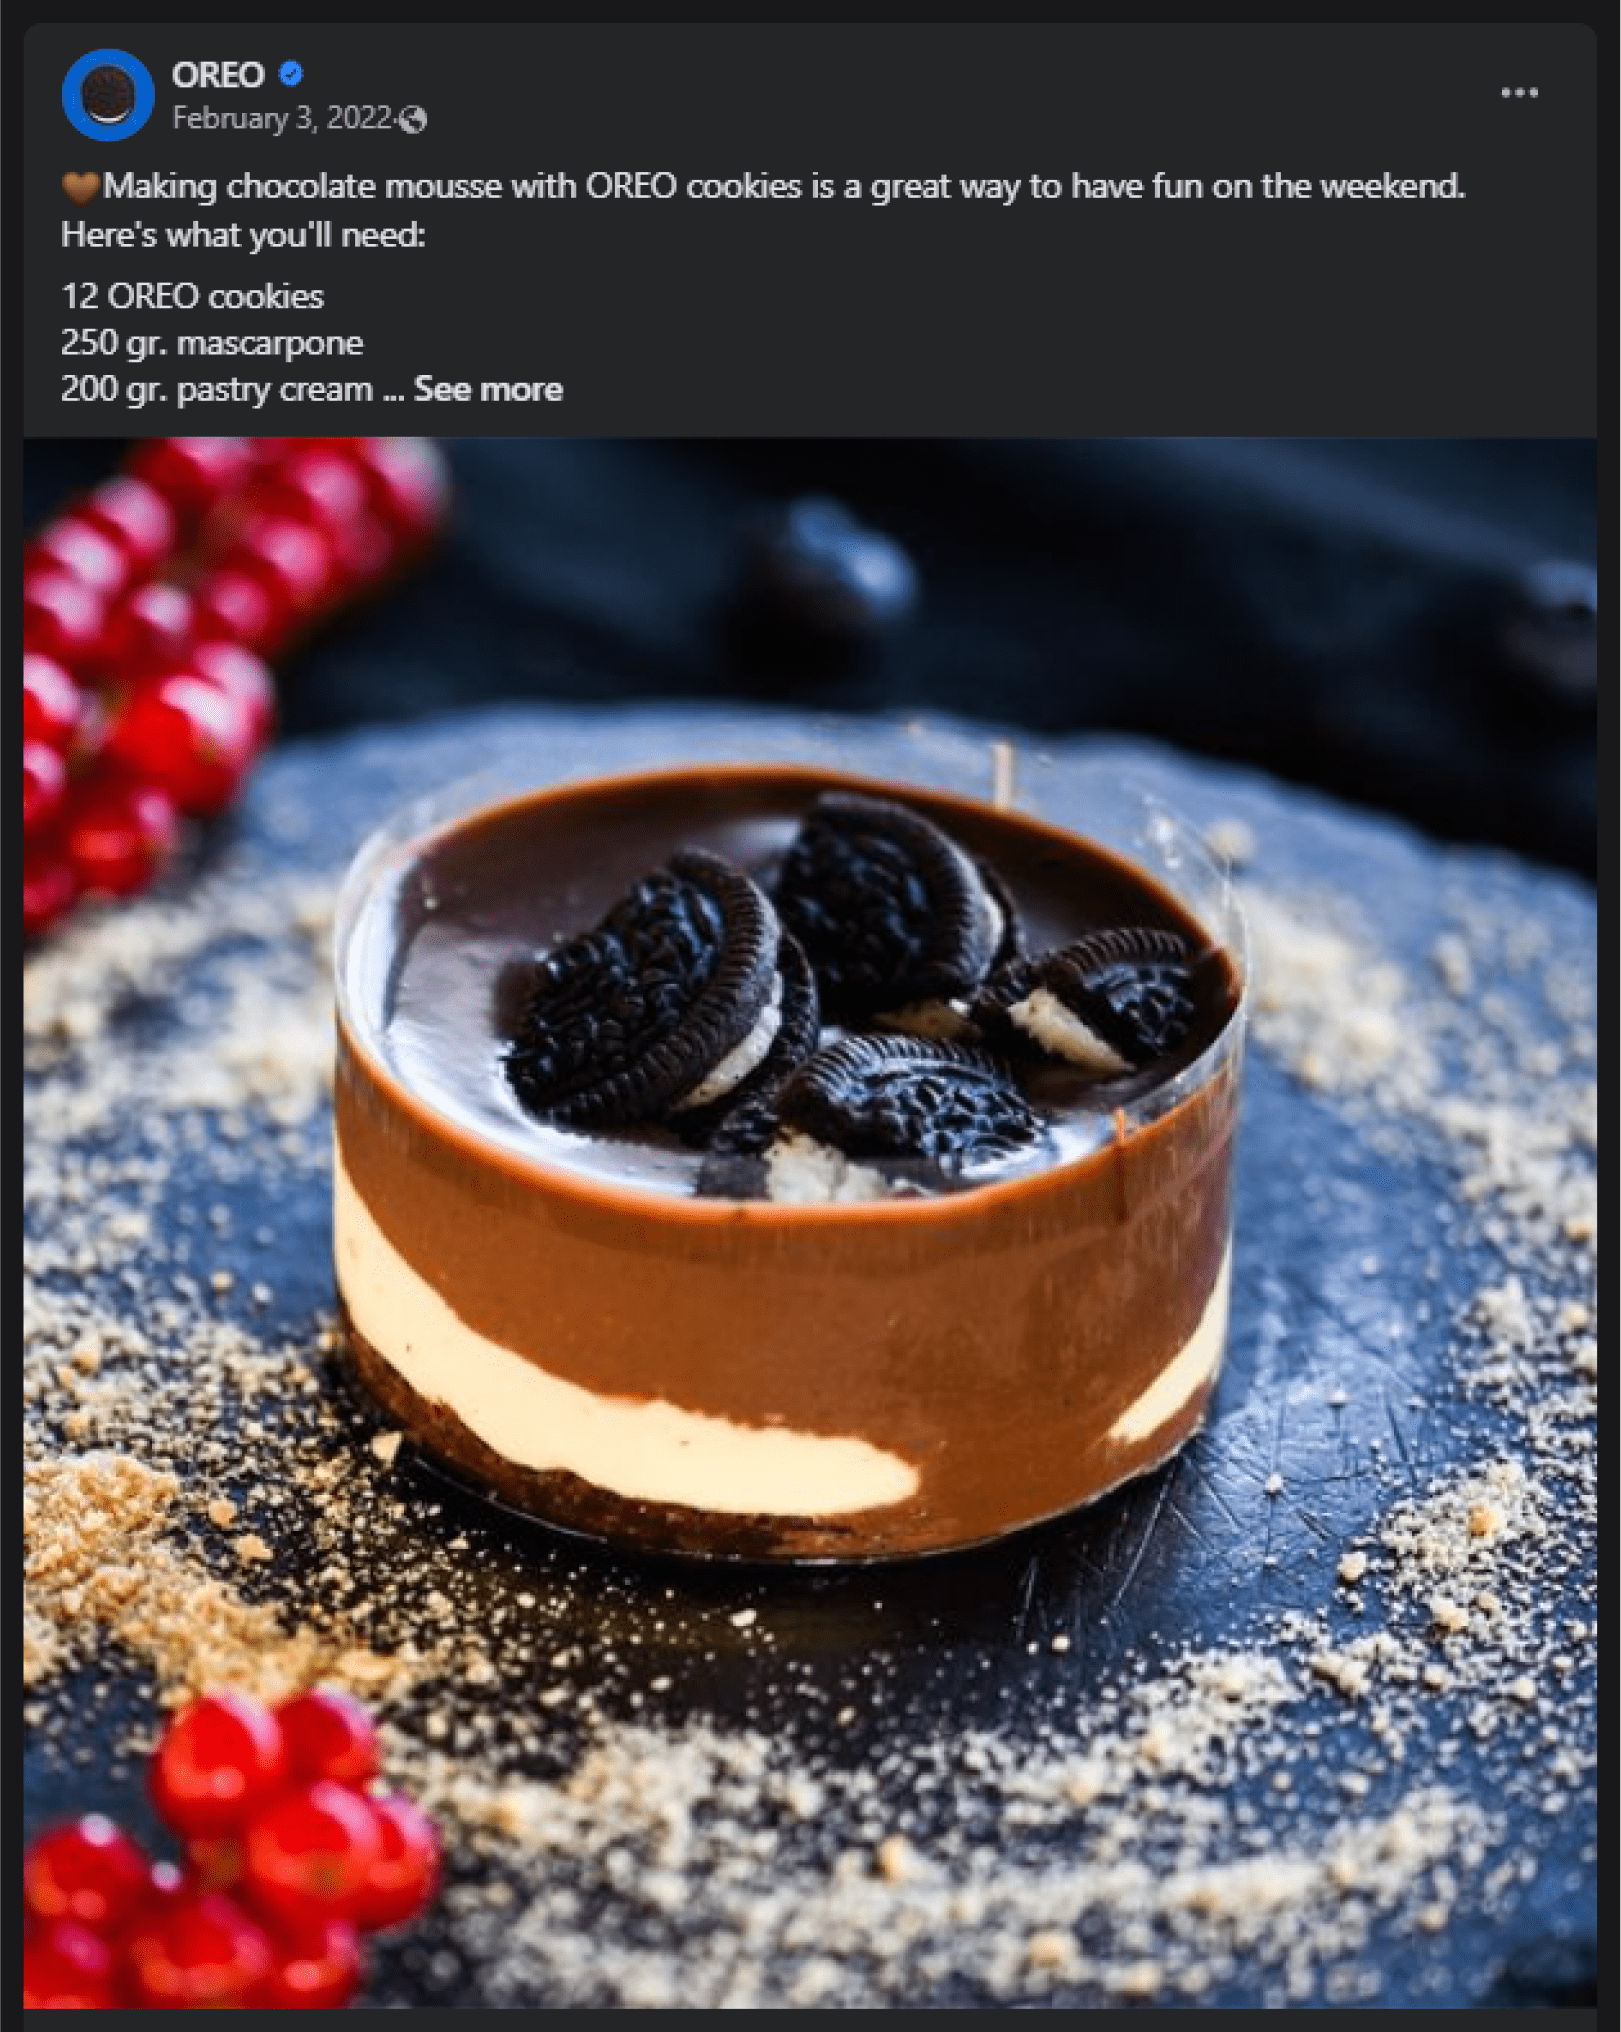 Facebook post by Oreo featuring a chocolate mousse recipe using Oreo cookies, exemplifying engaging DIY content with high social media interaction.